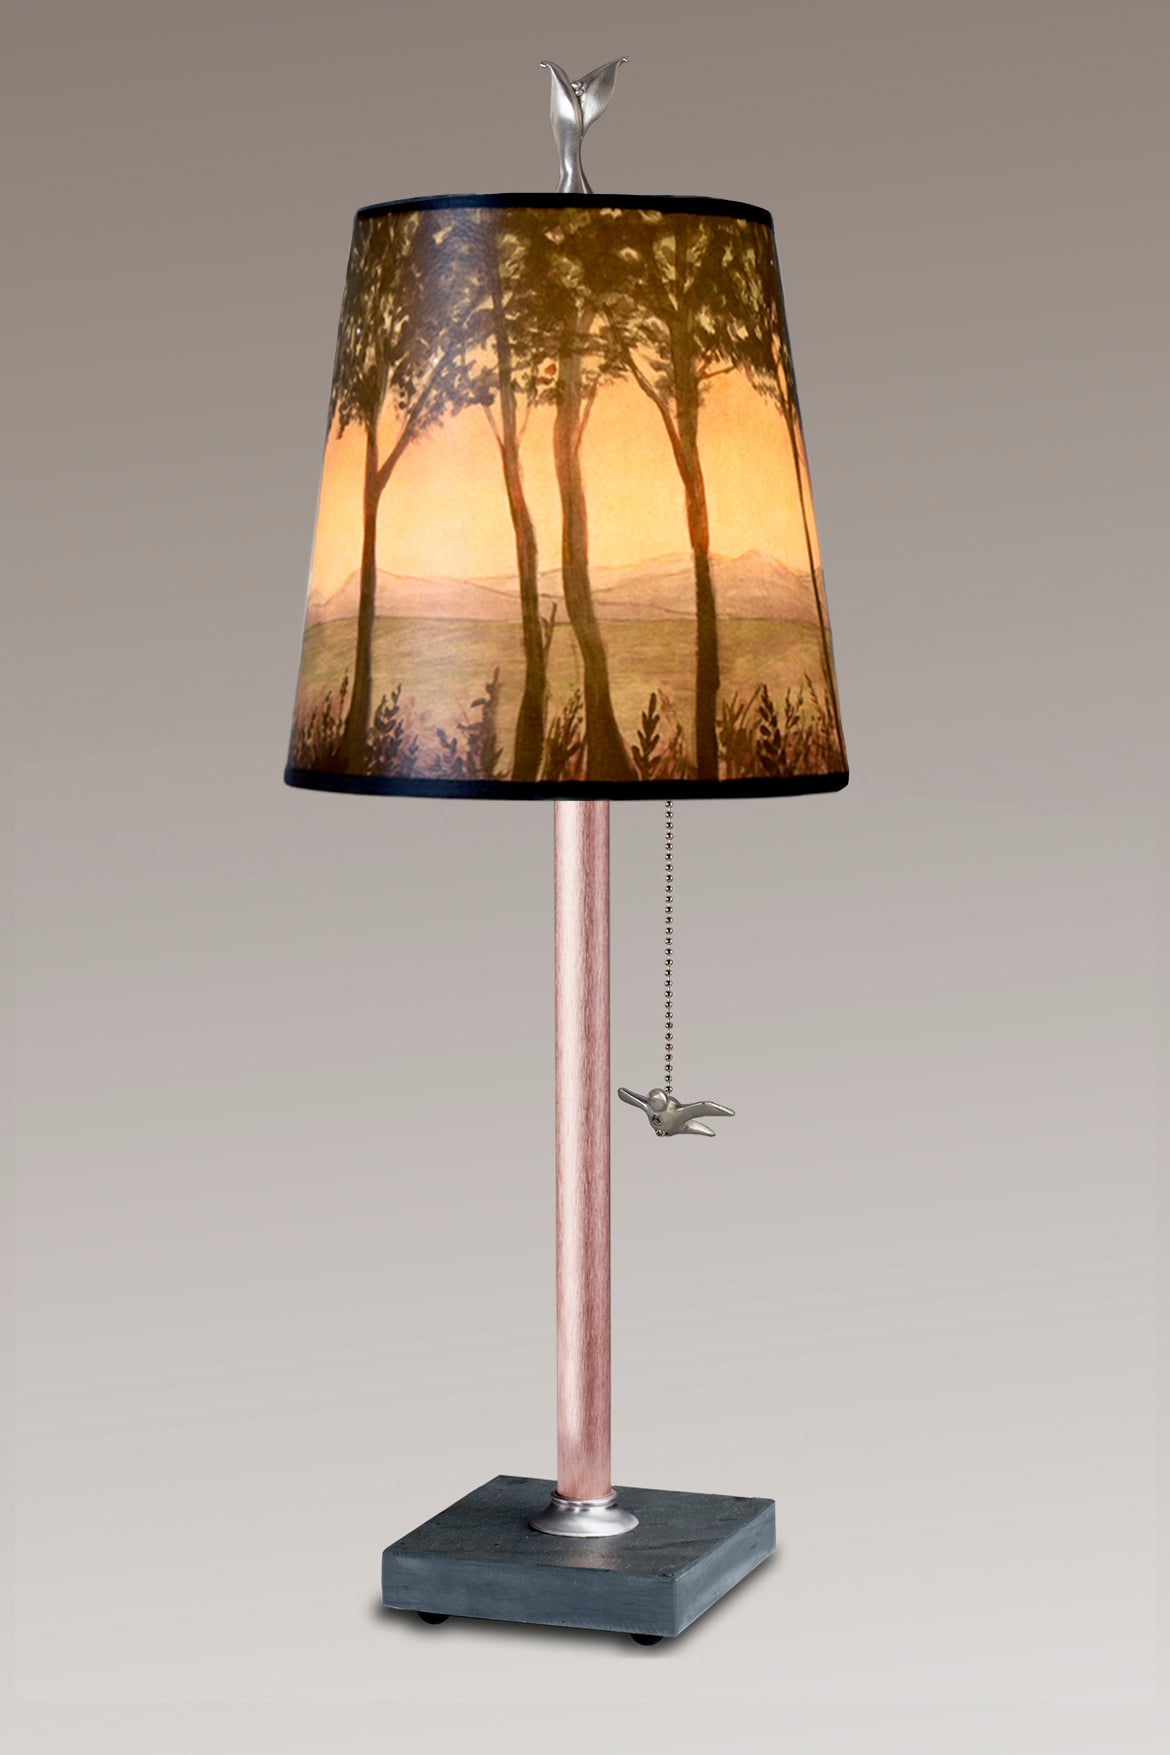 Janna Ugone &amp; Co Table Lamps Copper Table Lamp with Small Drum Shade in Dawn